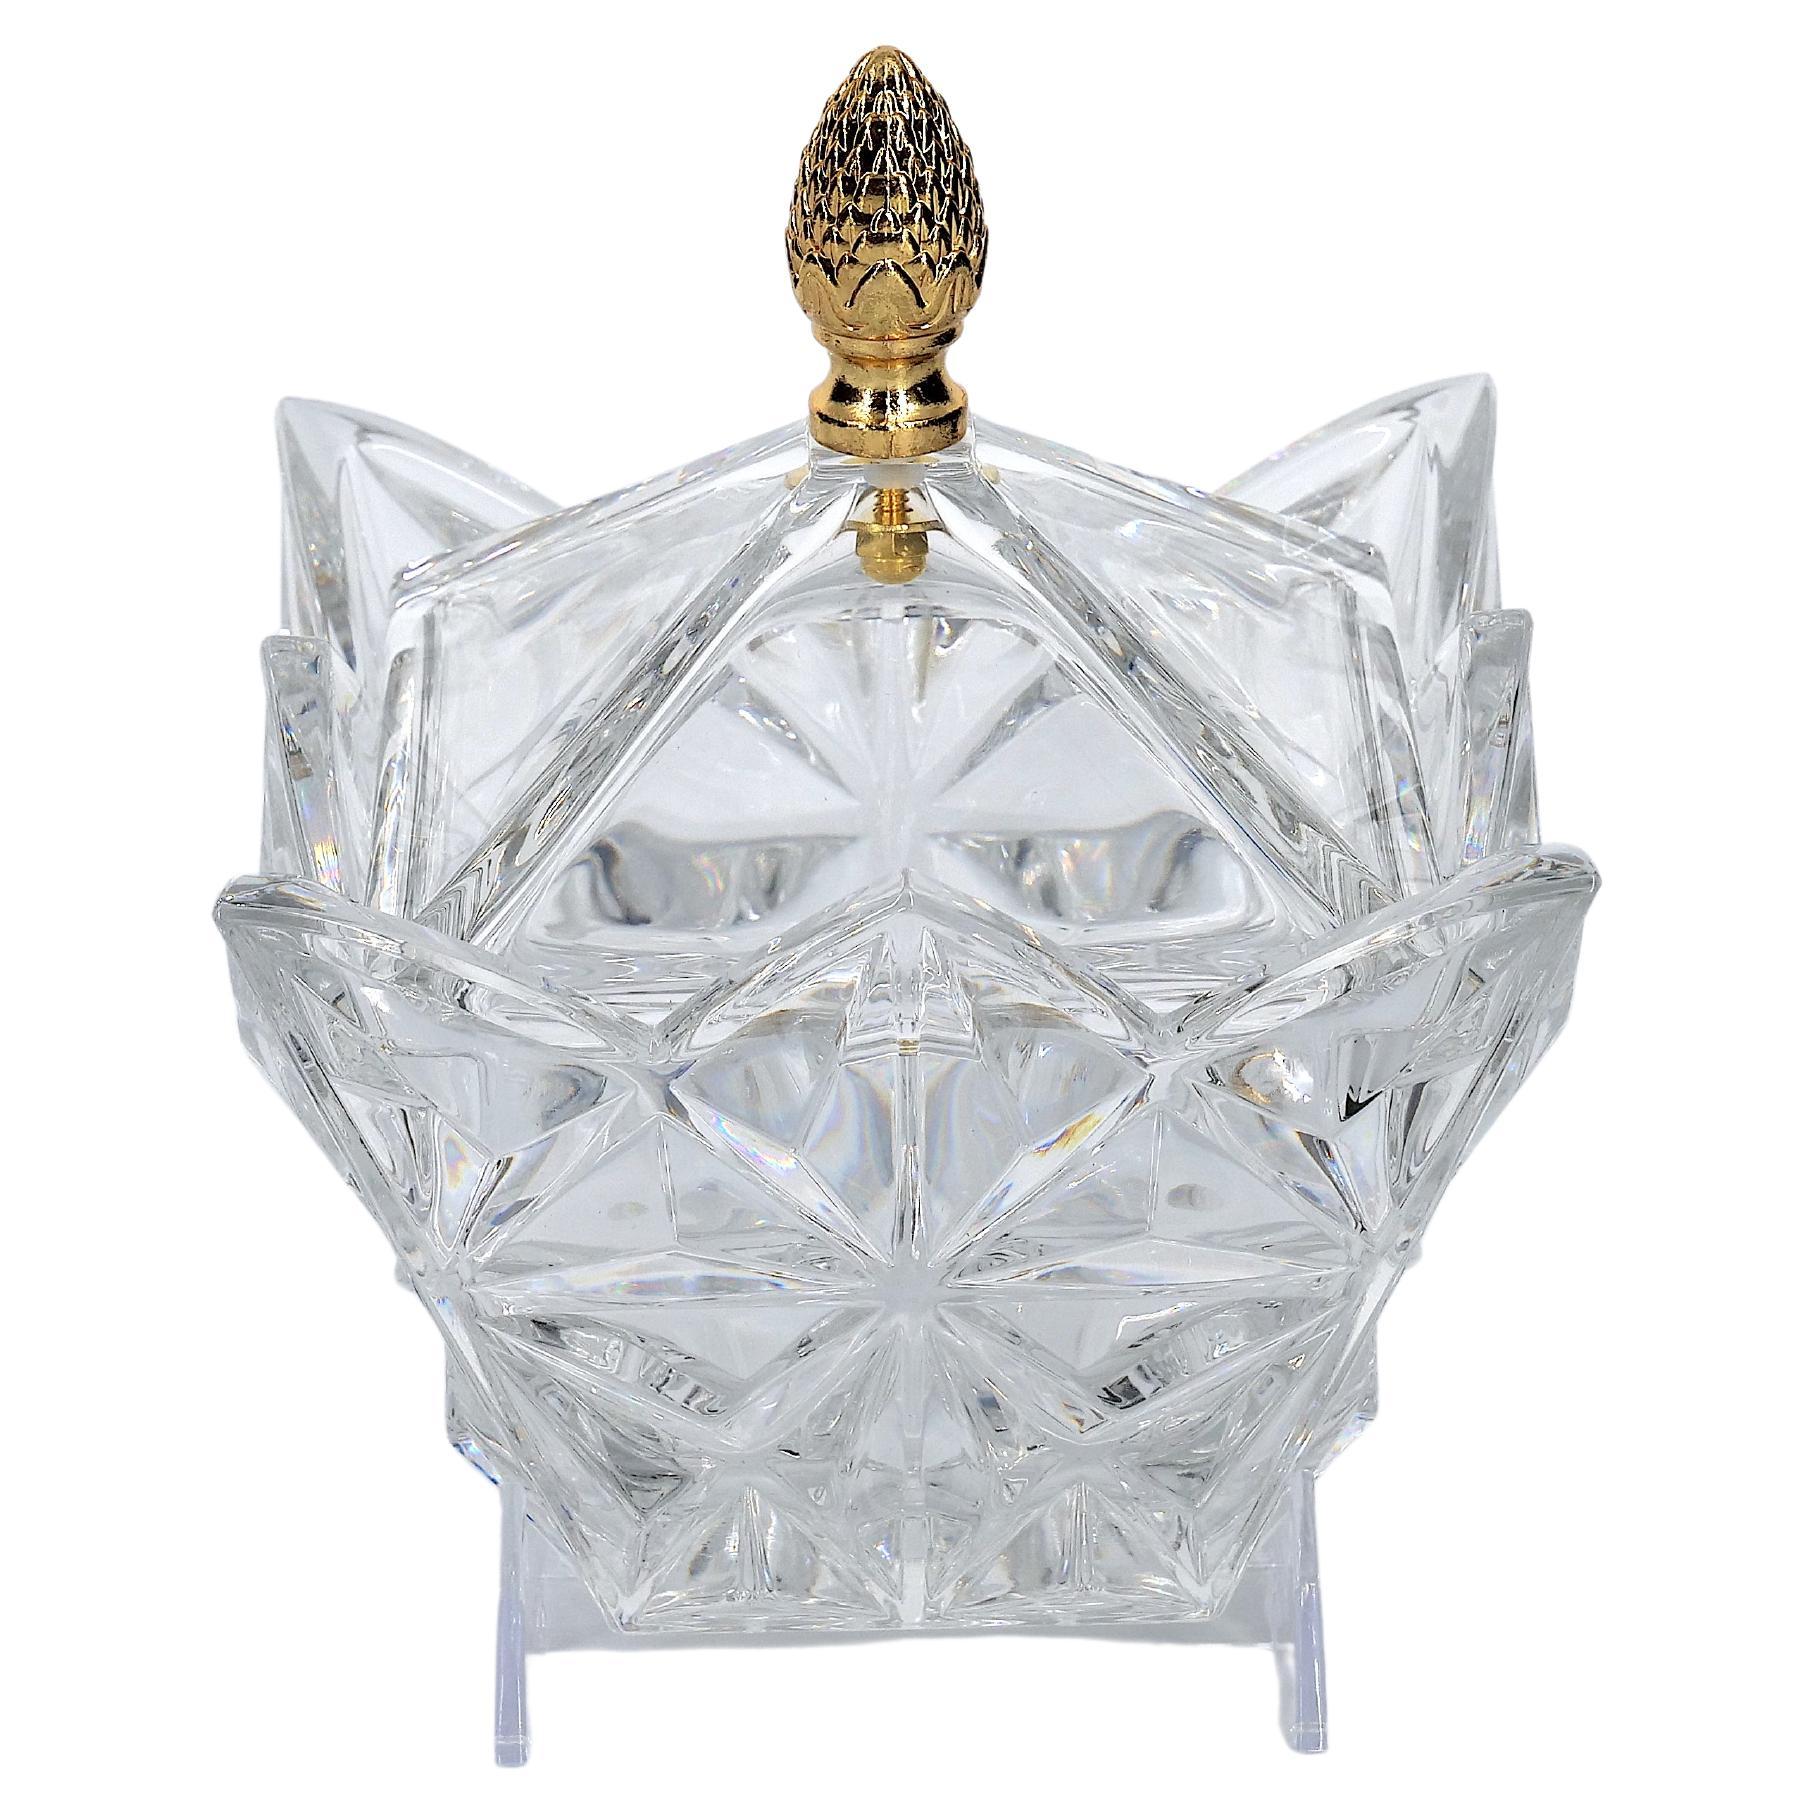 Late 20th century cut crystal tableware covered serving piece. The piece features a gilt top brass pinecone finial covers resting on a squared shape base with exterior cut crystal diamond shape design details. The piece is in great condition. Minor